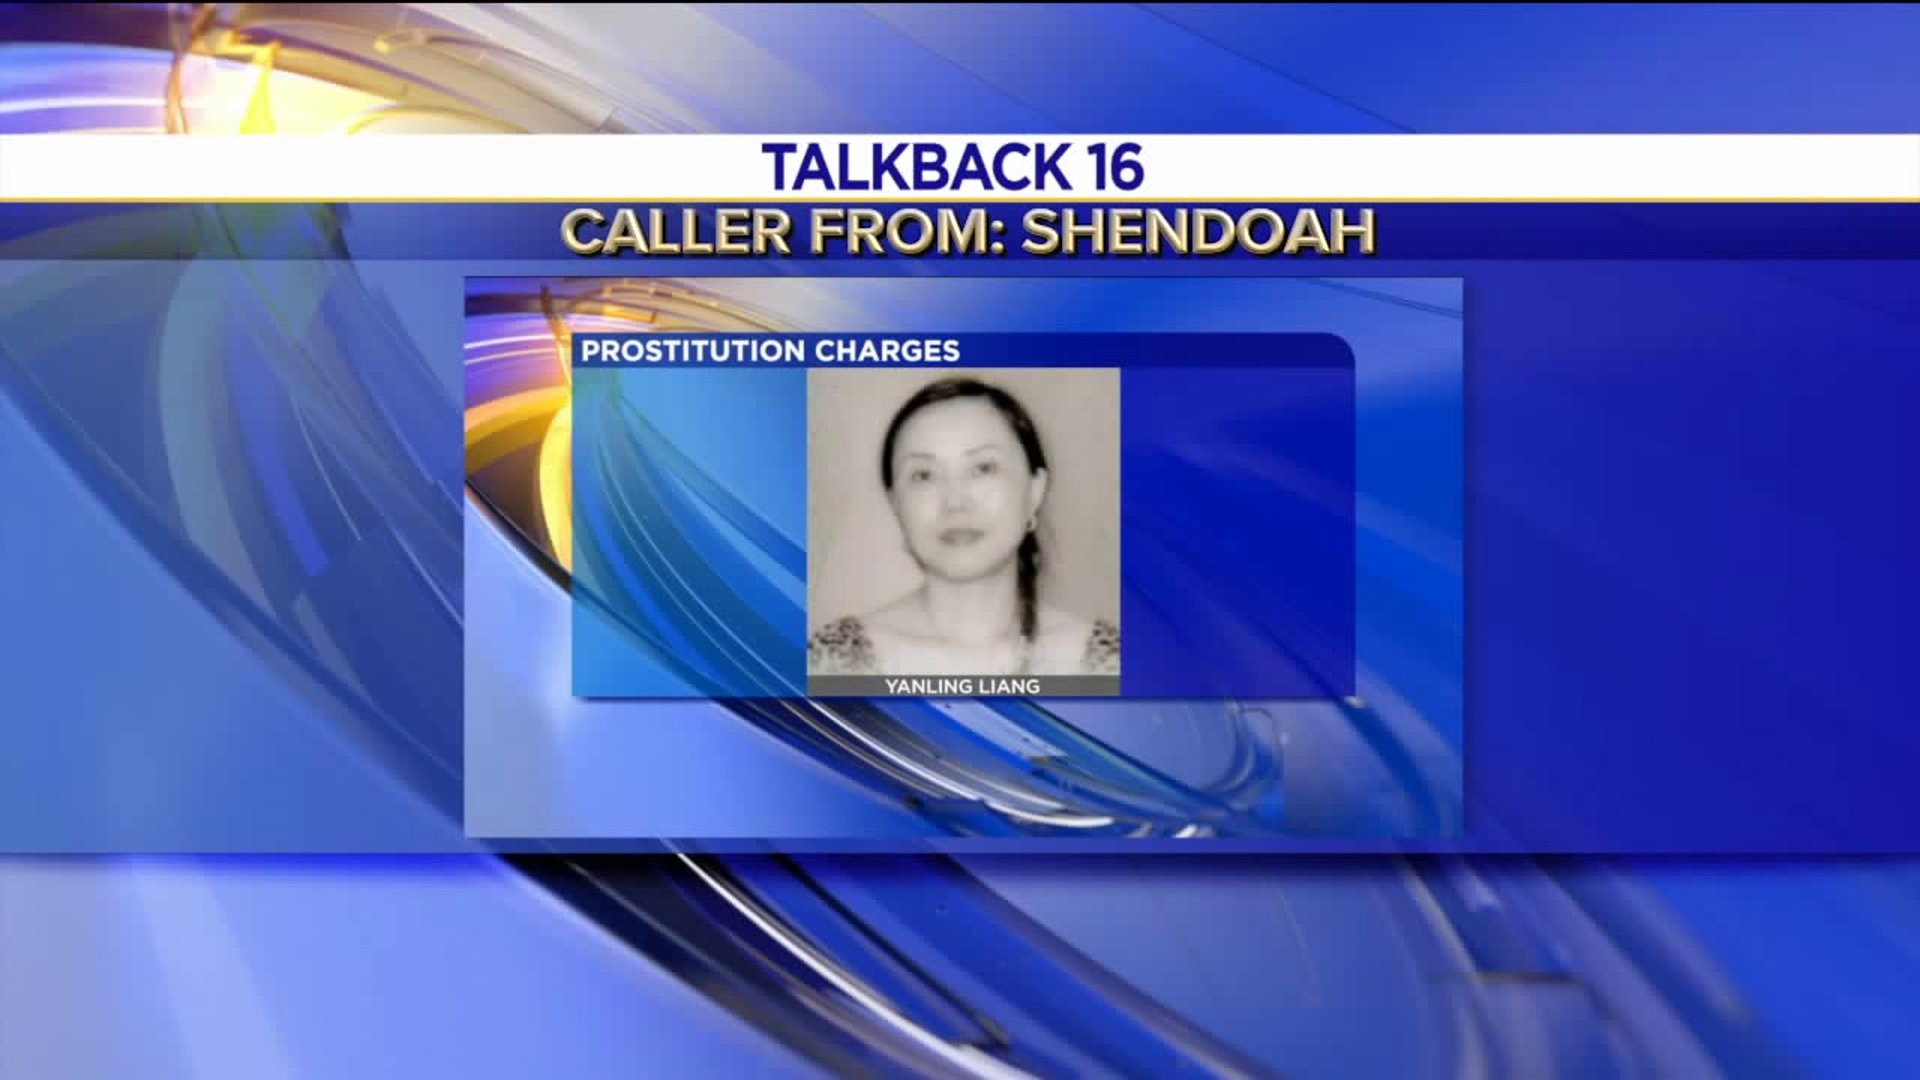 Talkback 16: Phone Calls, Big Rig Crashes, and a Prostitution Bust